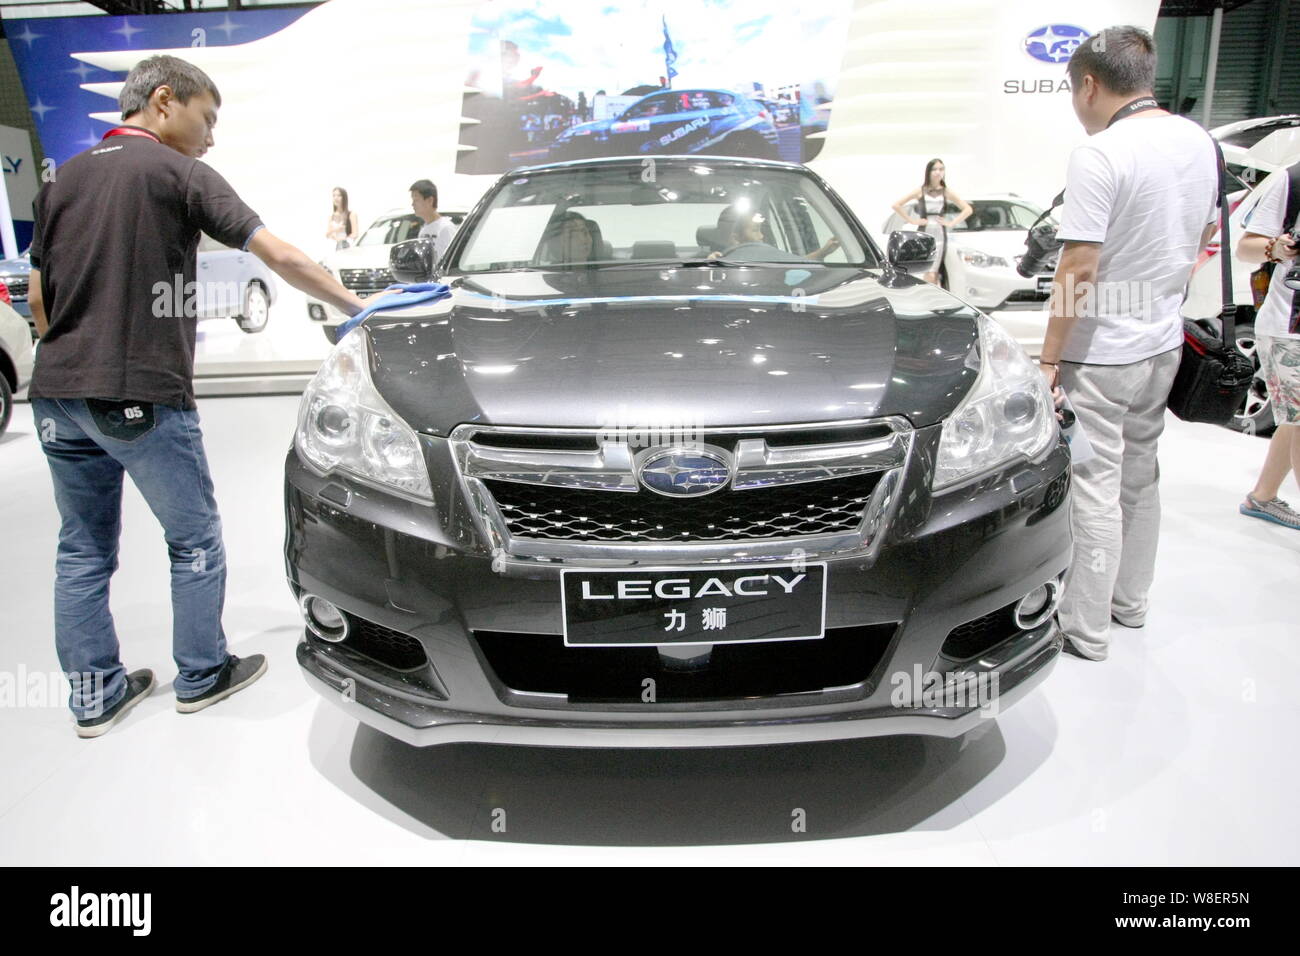 --FILE--Visitors try out or look at a Subaru Legacy on display during the 2014 Pudong International Automotive Exhibition, also known as Auto Pudong 2 Stock Photo